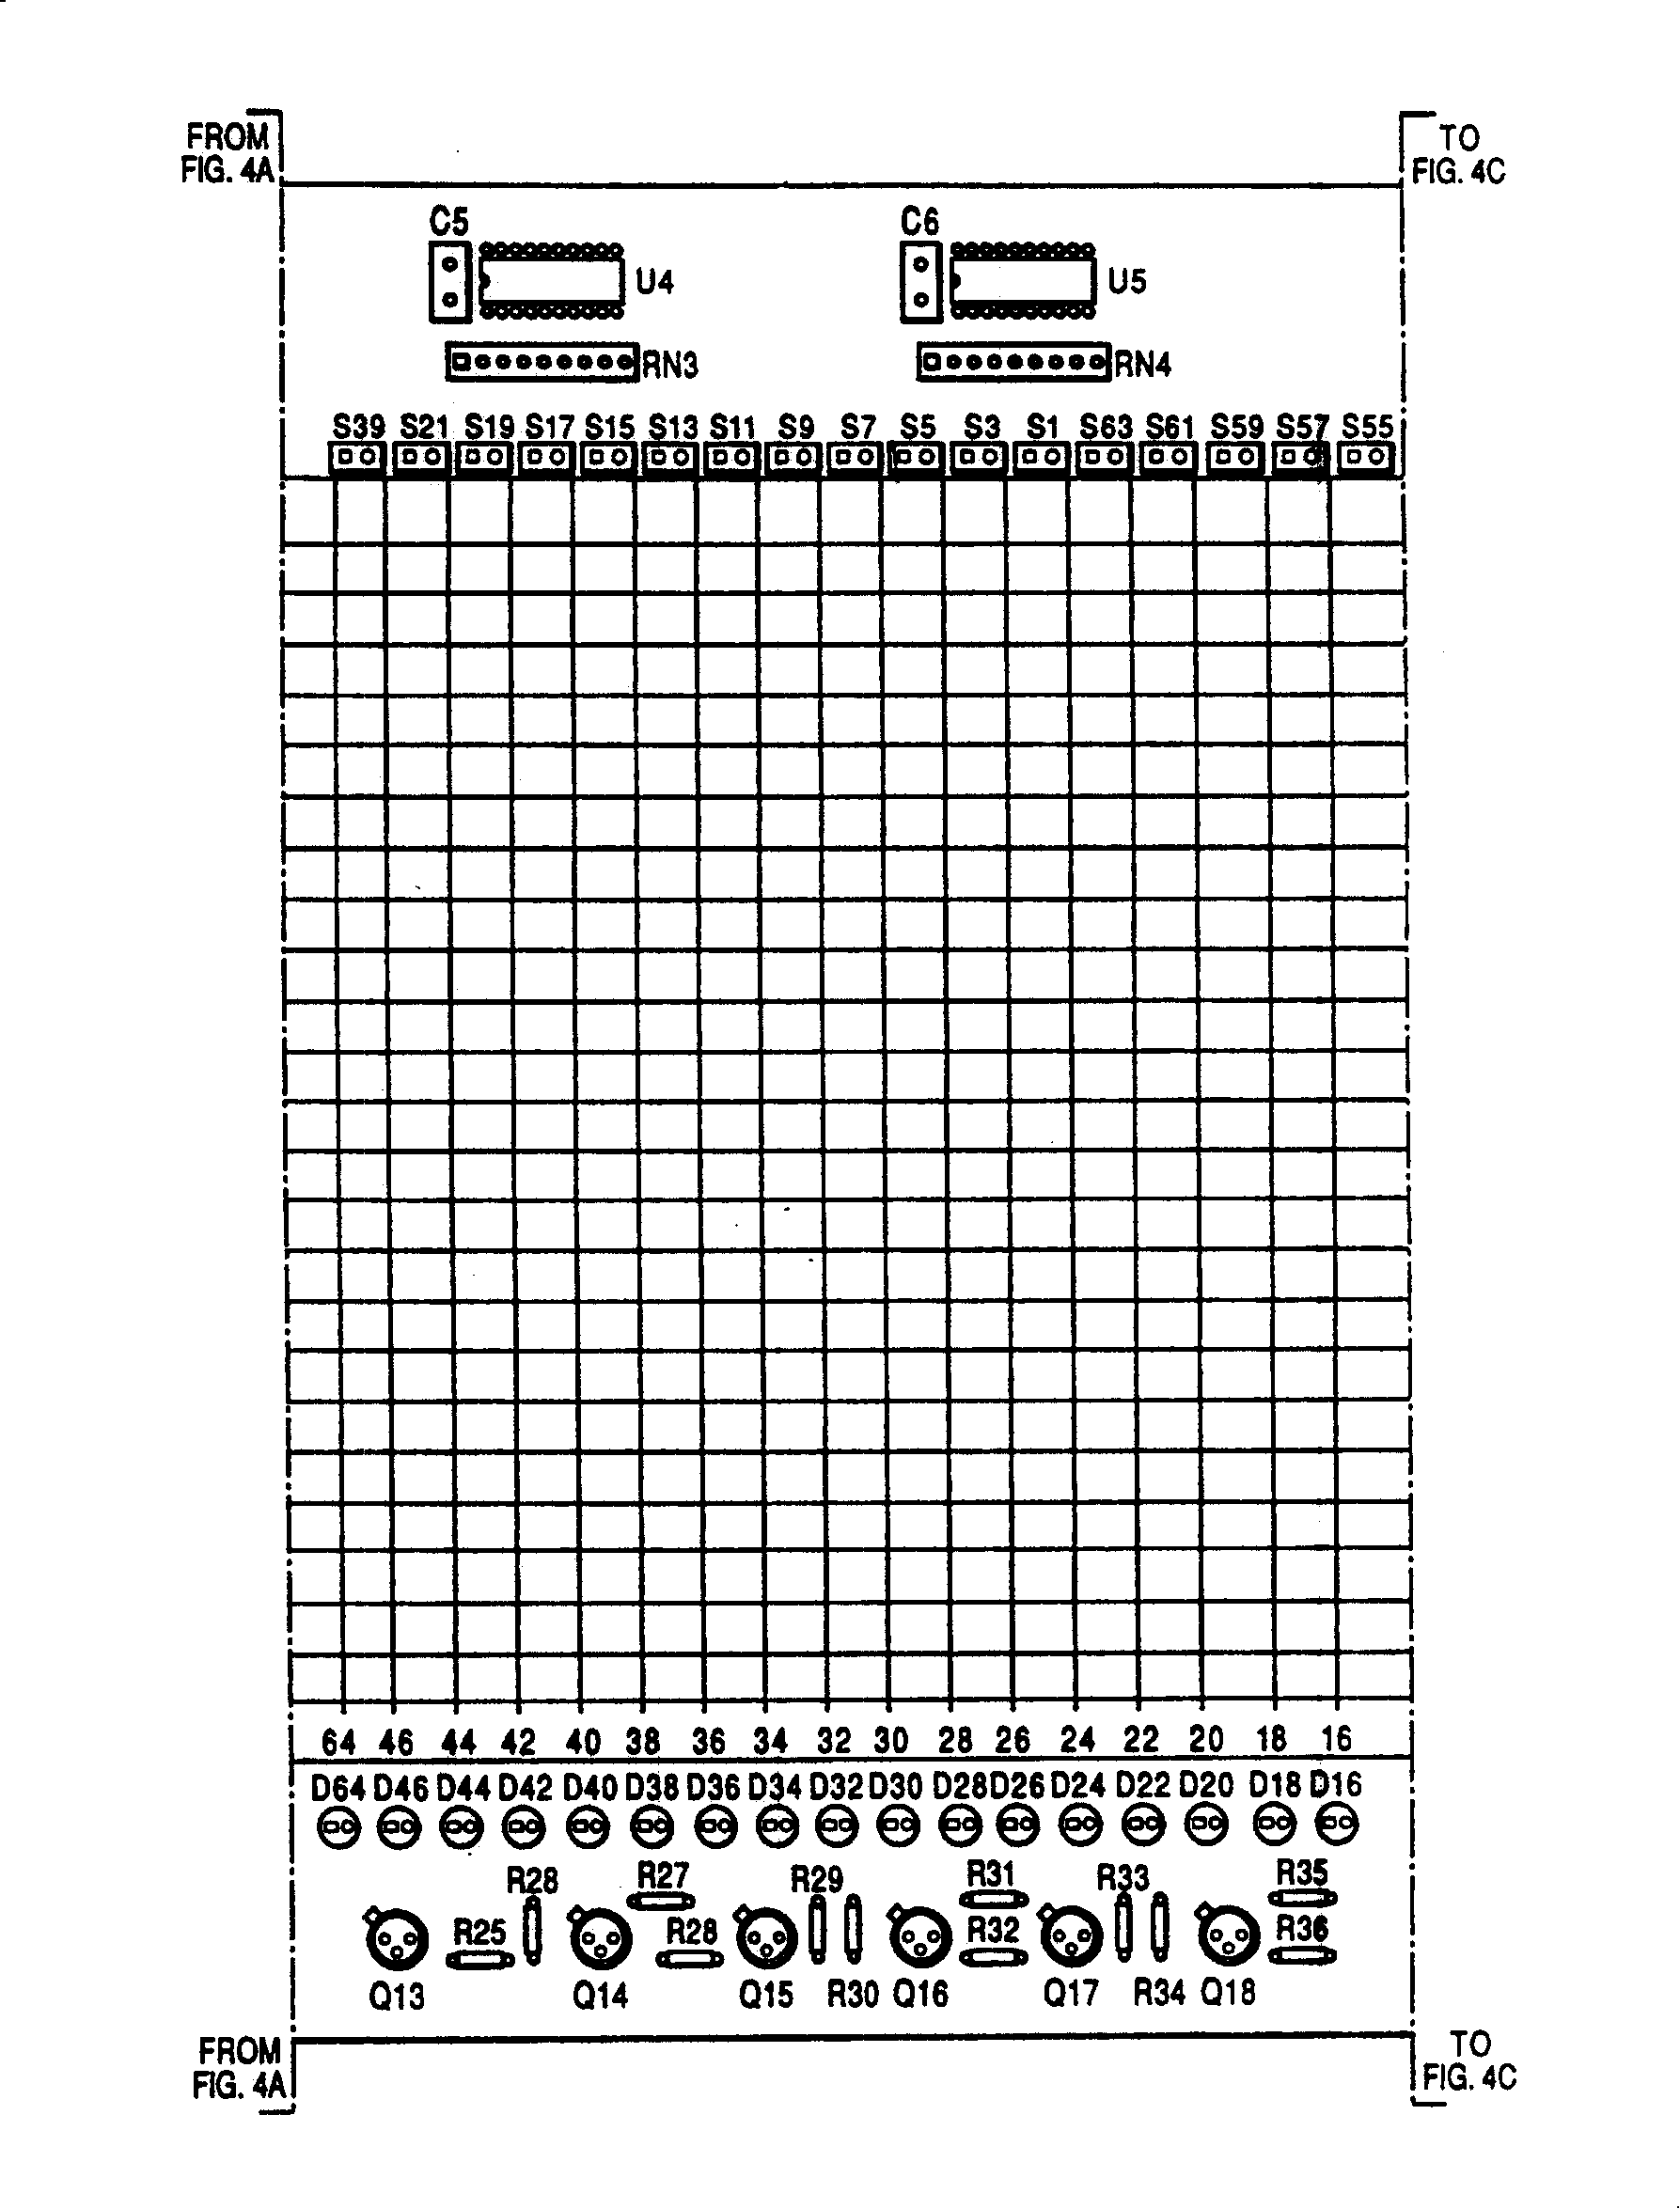 Infra-red ray emission and receiving circuit board unit and infra-red ray touch screen using same